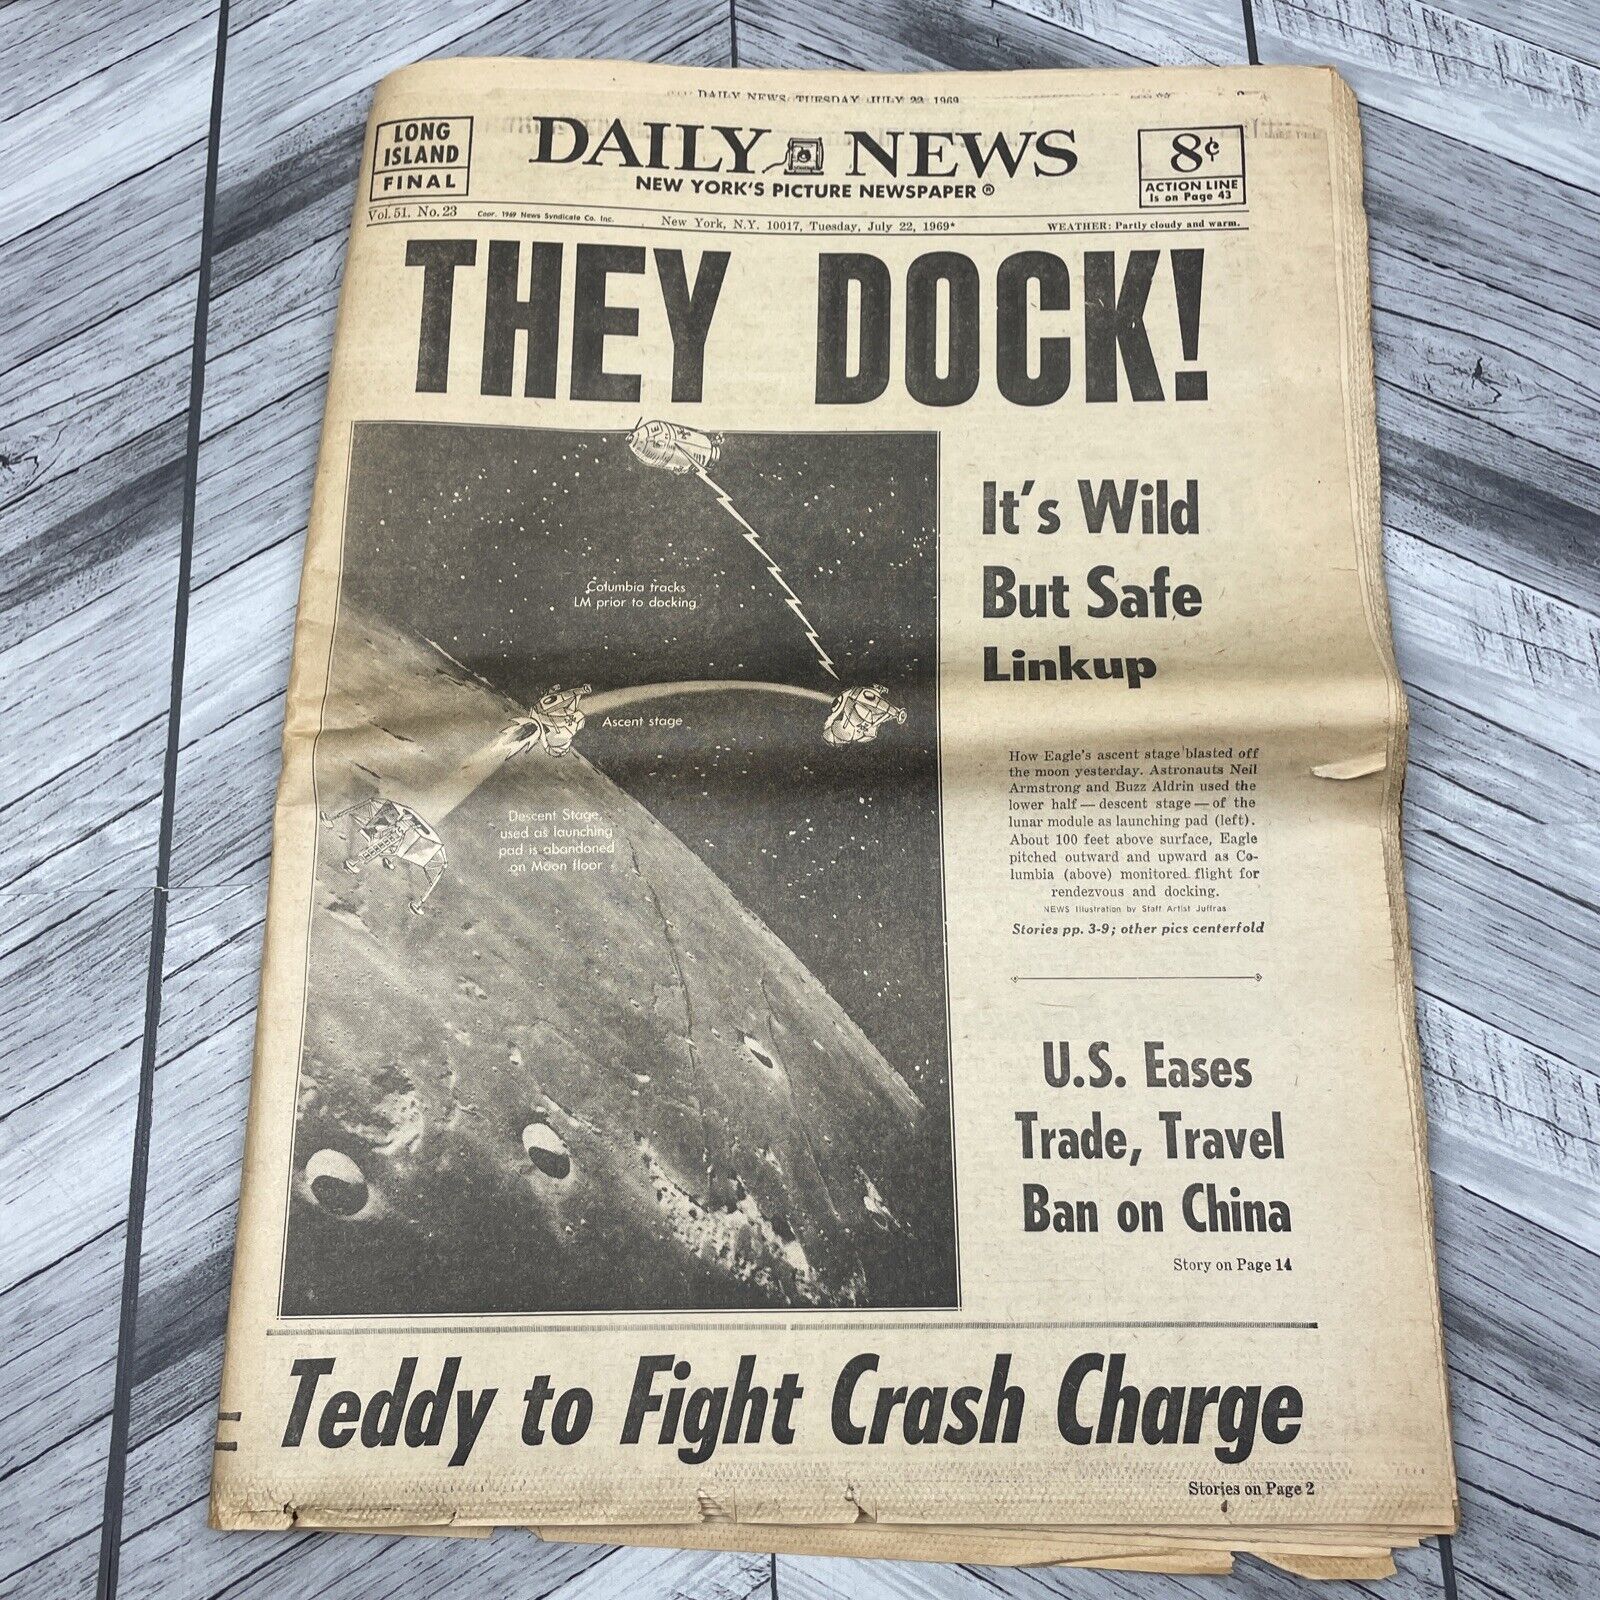 Vintage Daily News NY Tues July 22, 1969 MOON LANDING, Ted Kennedy Lawsuit